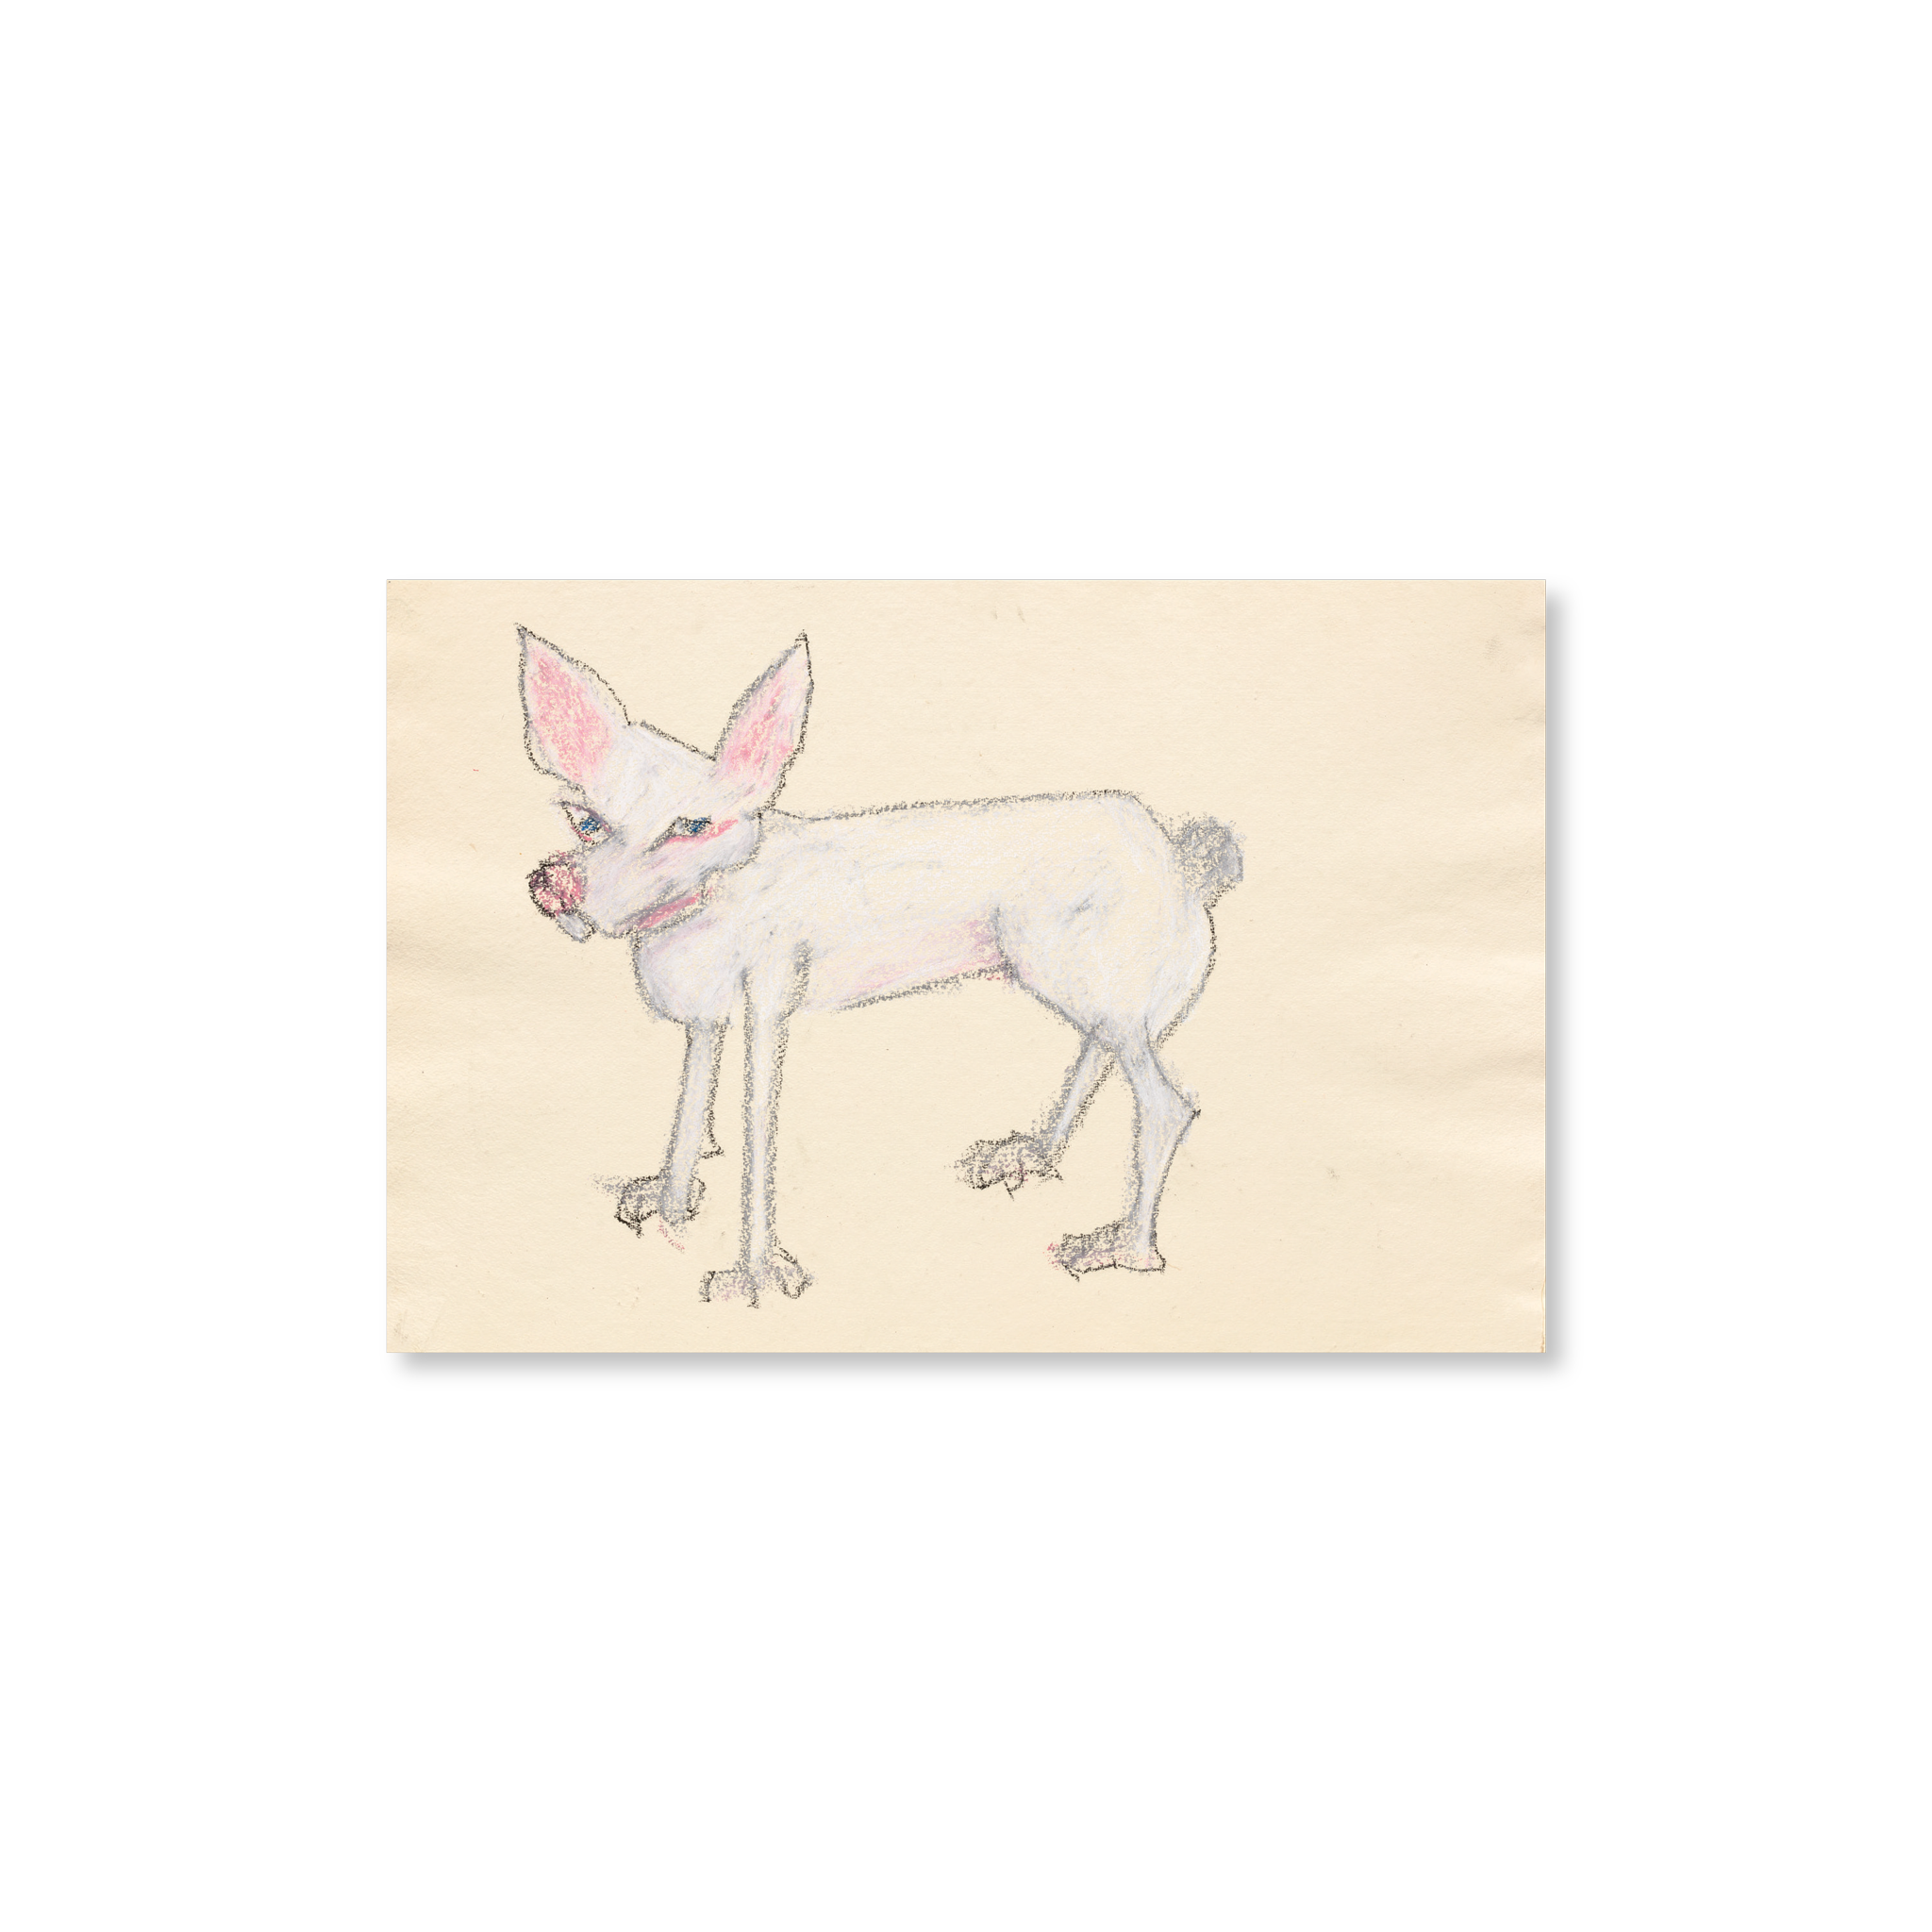 A little dog illustrated, in white, on a beige background.